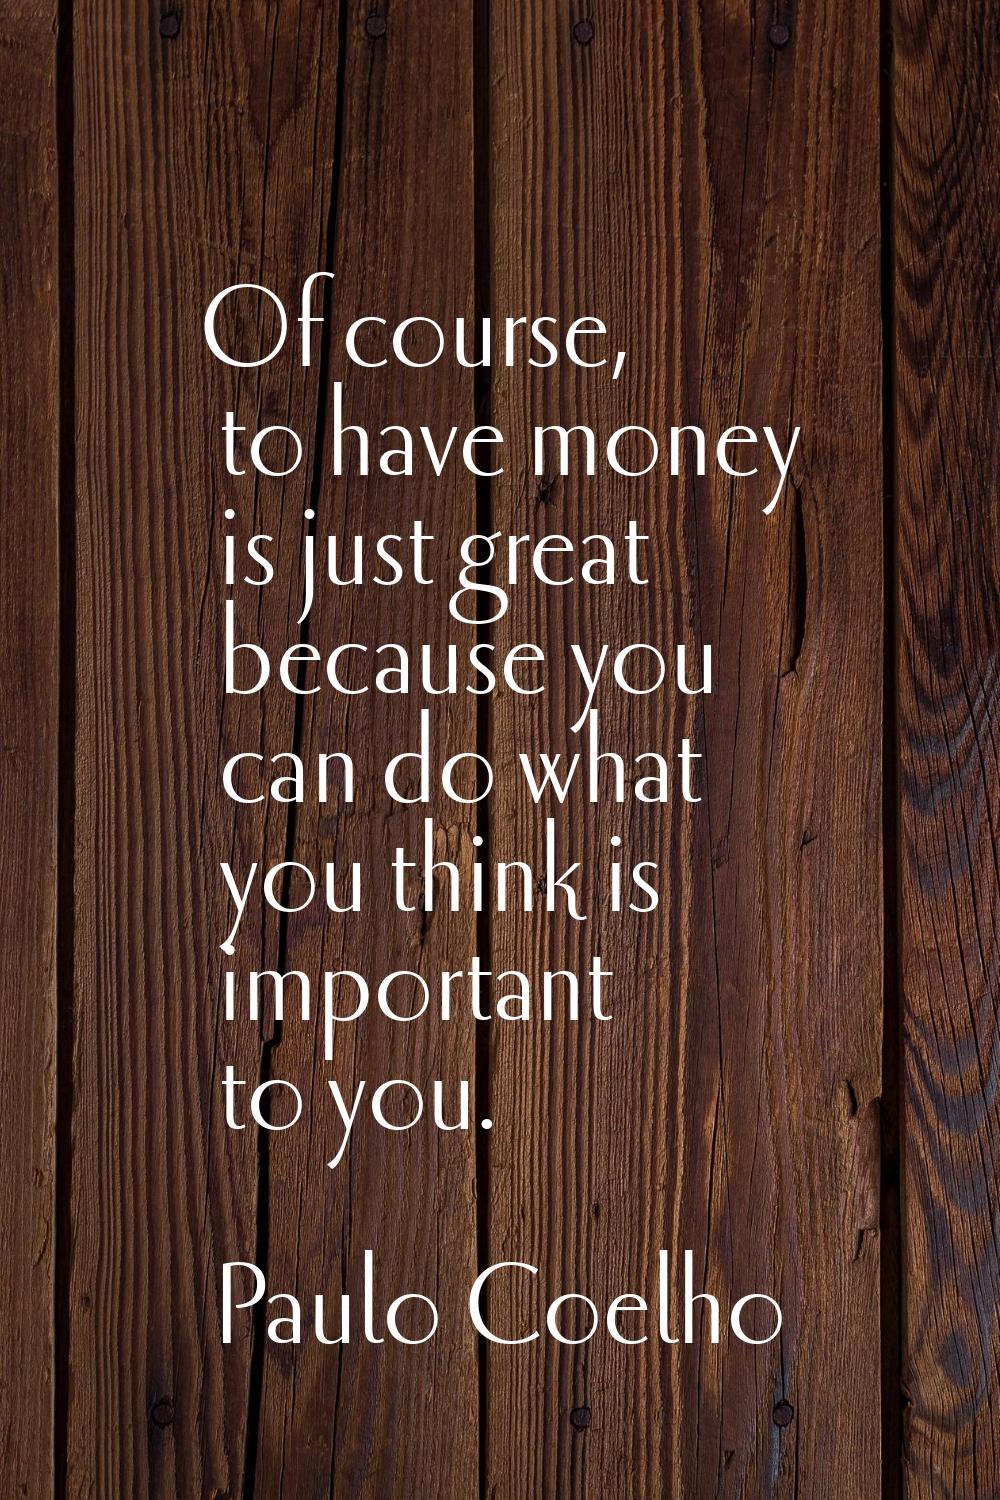 Of course, to have money is just great because you can do what you think is important to you.